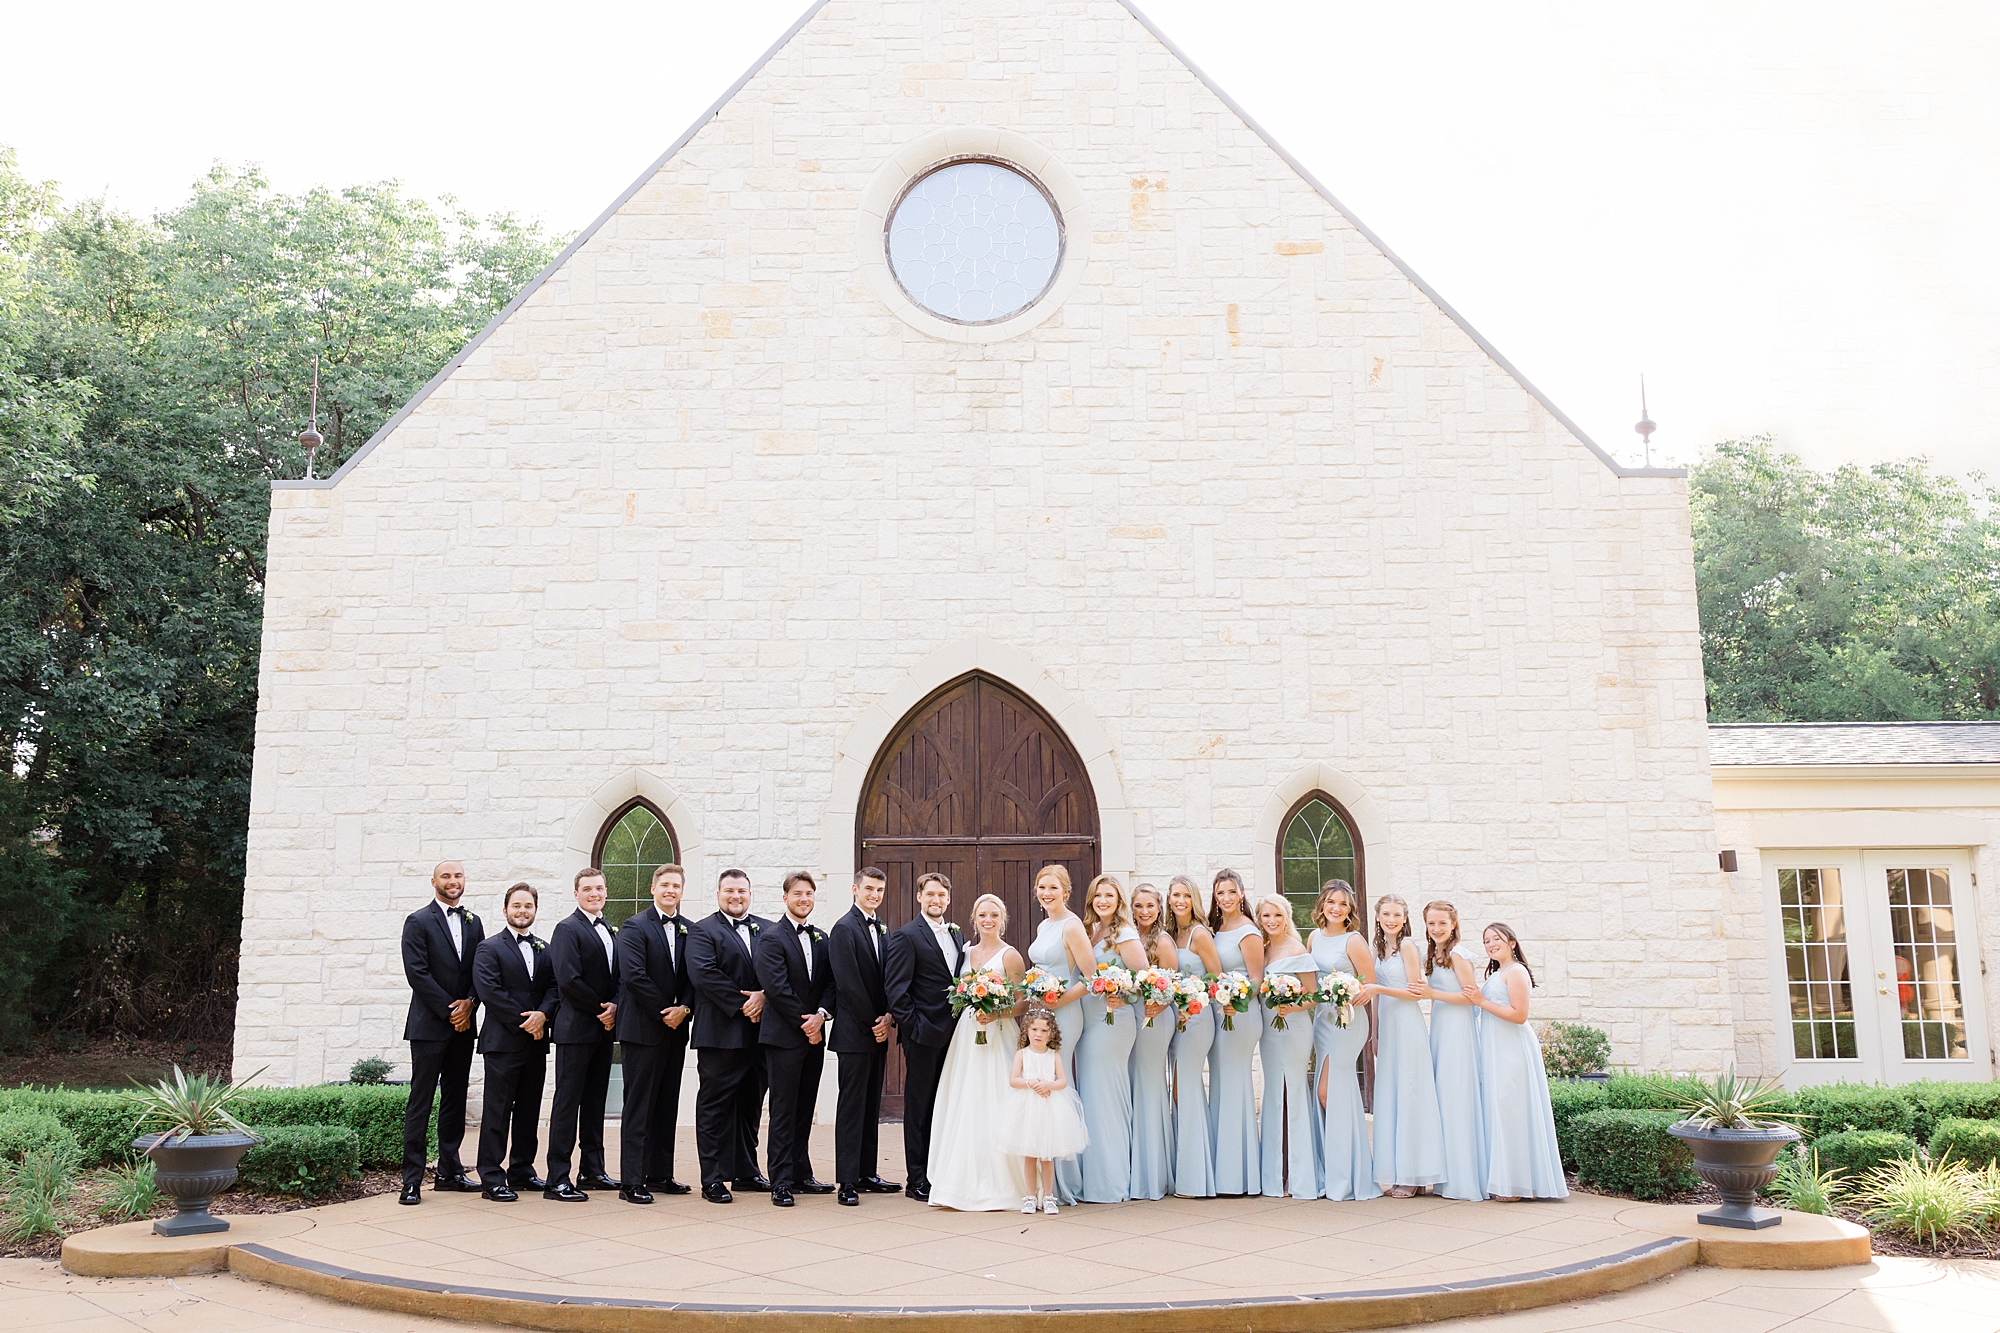 newlyweds stand with wedding party in tuxes and blue gowns